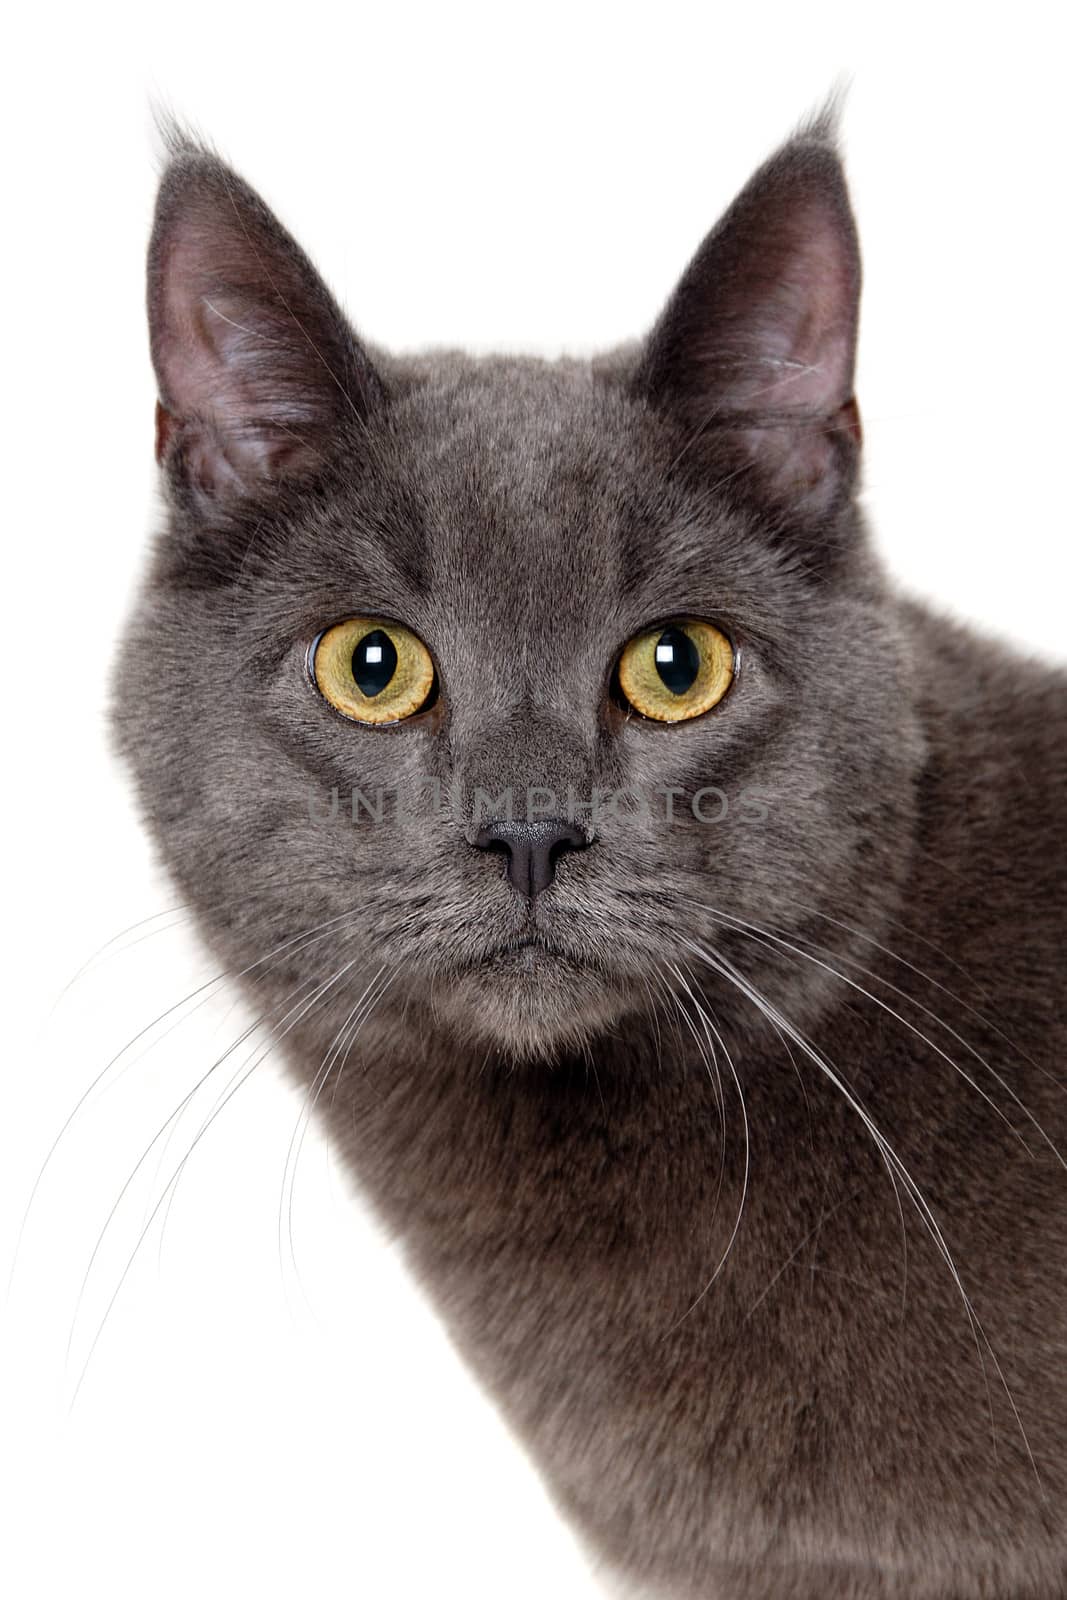 Face of gray cat on white background by cfoto